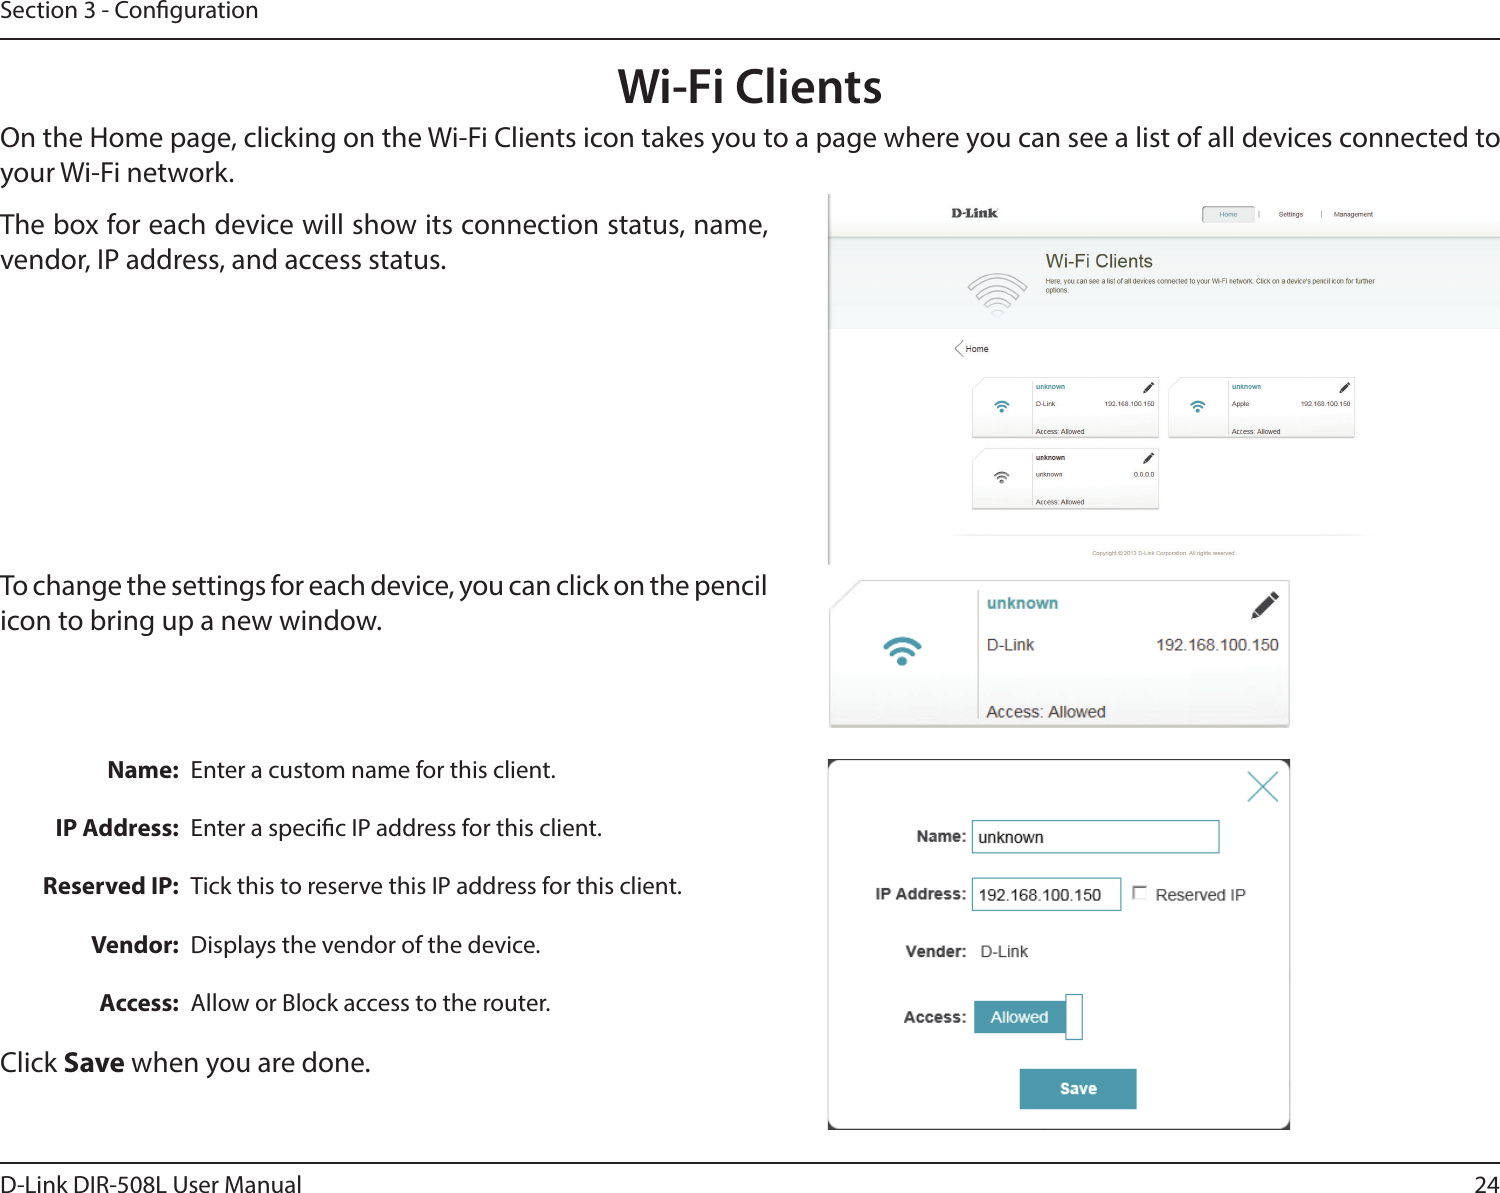 24D-Link DIR-508L User ManualSection 3 - CongurationWi-Fi ClientsOn the Home page, clicking on the Wi-Fi Clients icon takes you to a page where you can see a list of all devices connected to your Wi-Fi network. Name:IP Address:Reserved IP:Vendor:Access:Enter a custom name for this client.Enter a specic IP address for this client.Tick this to reserve this IP address for this client.Displays the vendor of the device.Allow or Block access to the router.The box for each device will show its connection status, name, vendor, IP address, and access status.Click Save when you are done.To change the settings for each device, you can click on the pencil icon to bring up a new window.